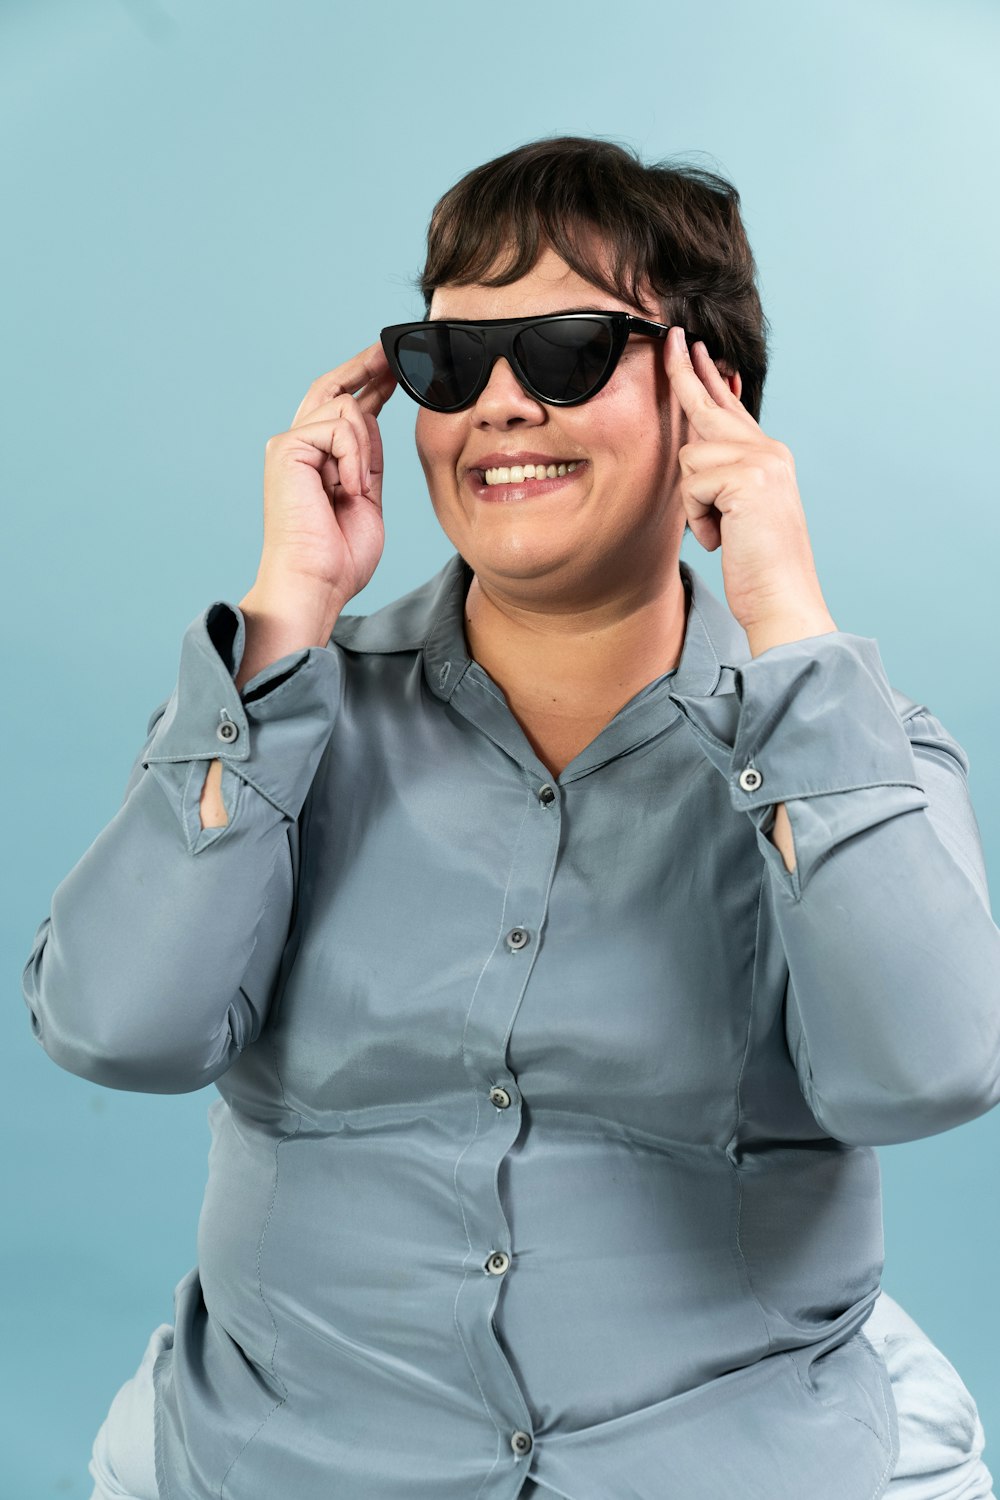 a woman in a blue shirt and black sunglasses